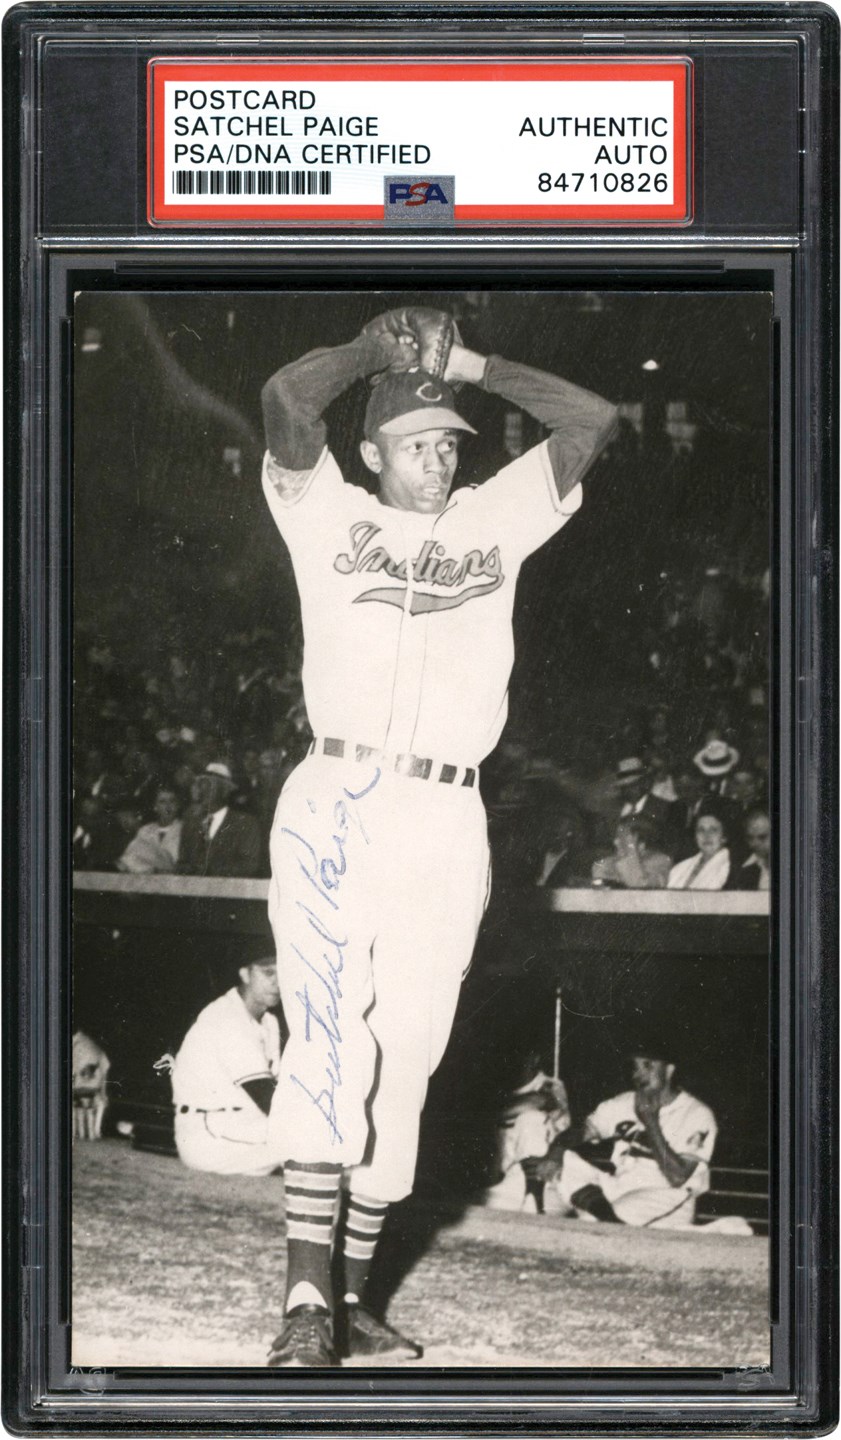 Satchel Paige Signed Real Photo Postcard - Image Used for 1949 Team Picture Pack Photo (PSA)